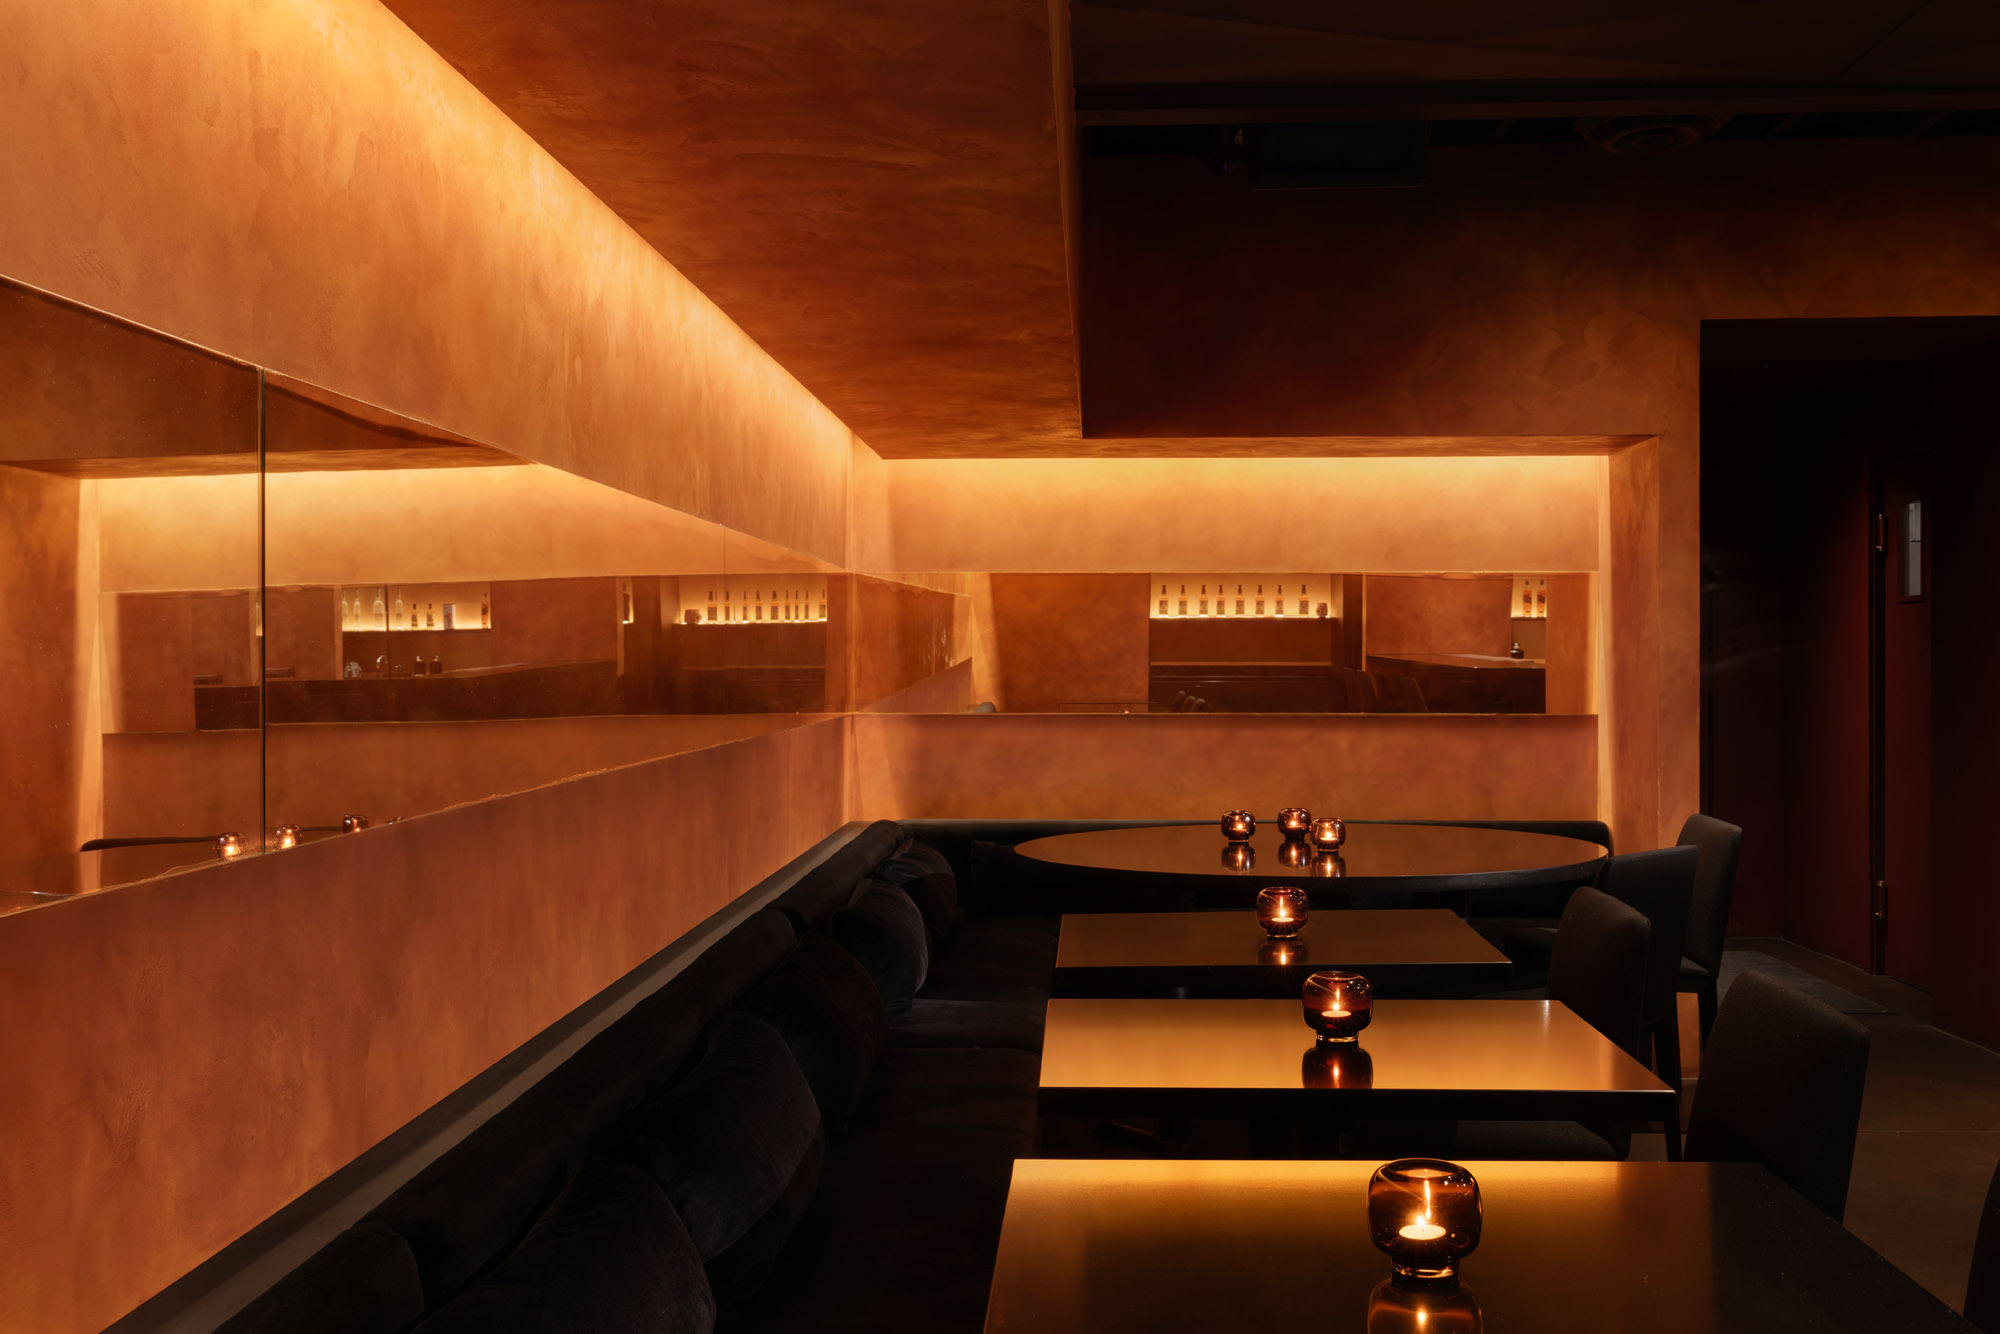 Different seating options at Ama Bar, all enveloped by an orange atmosphere